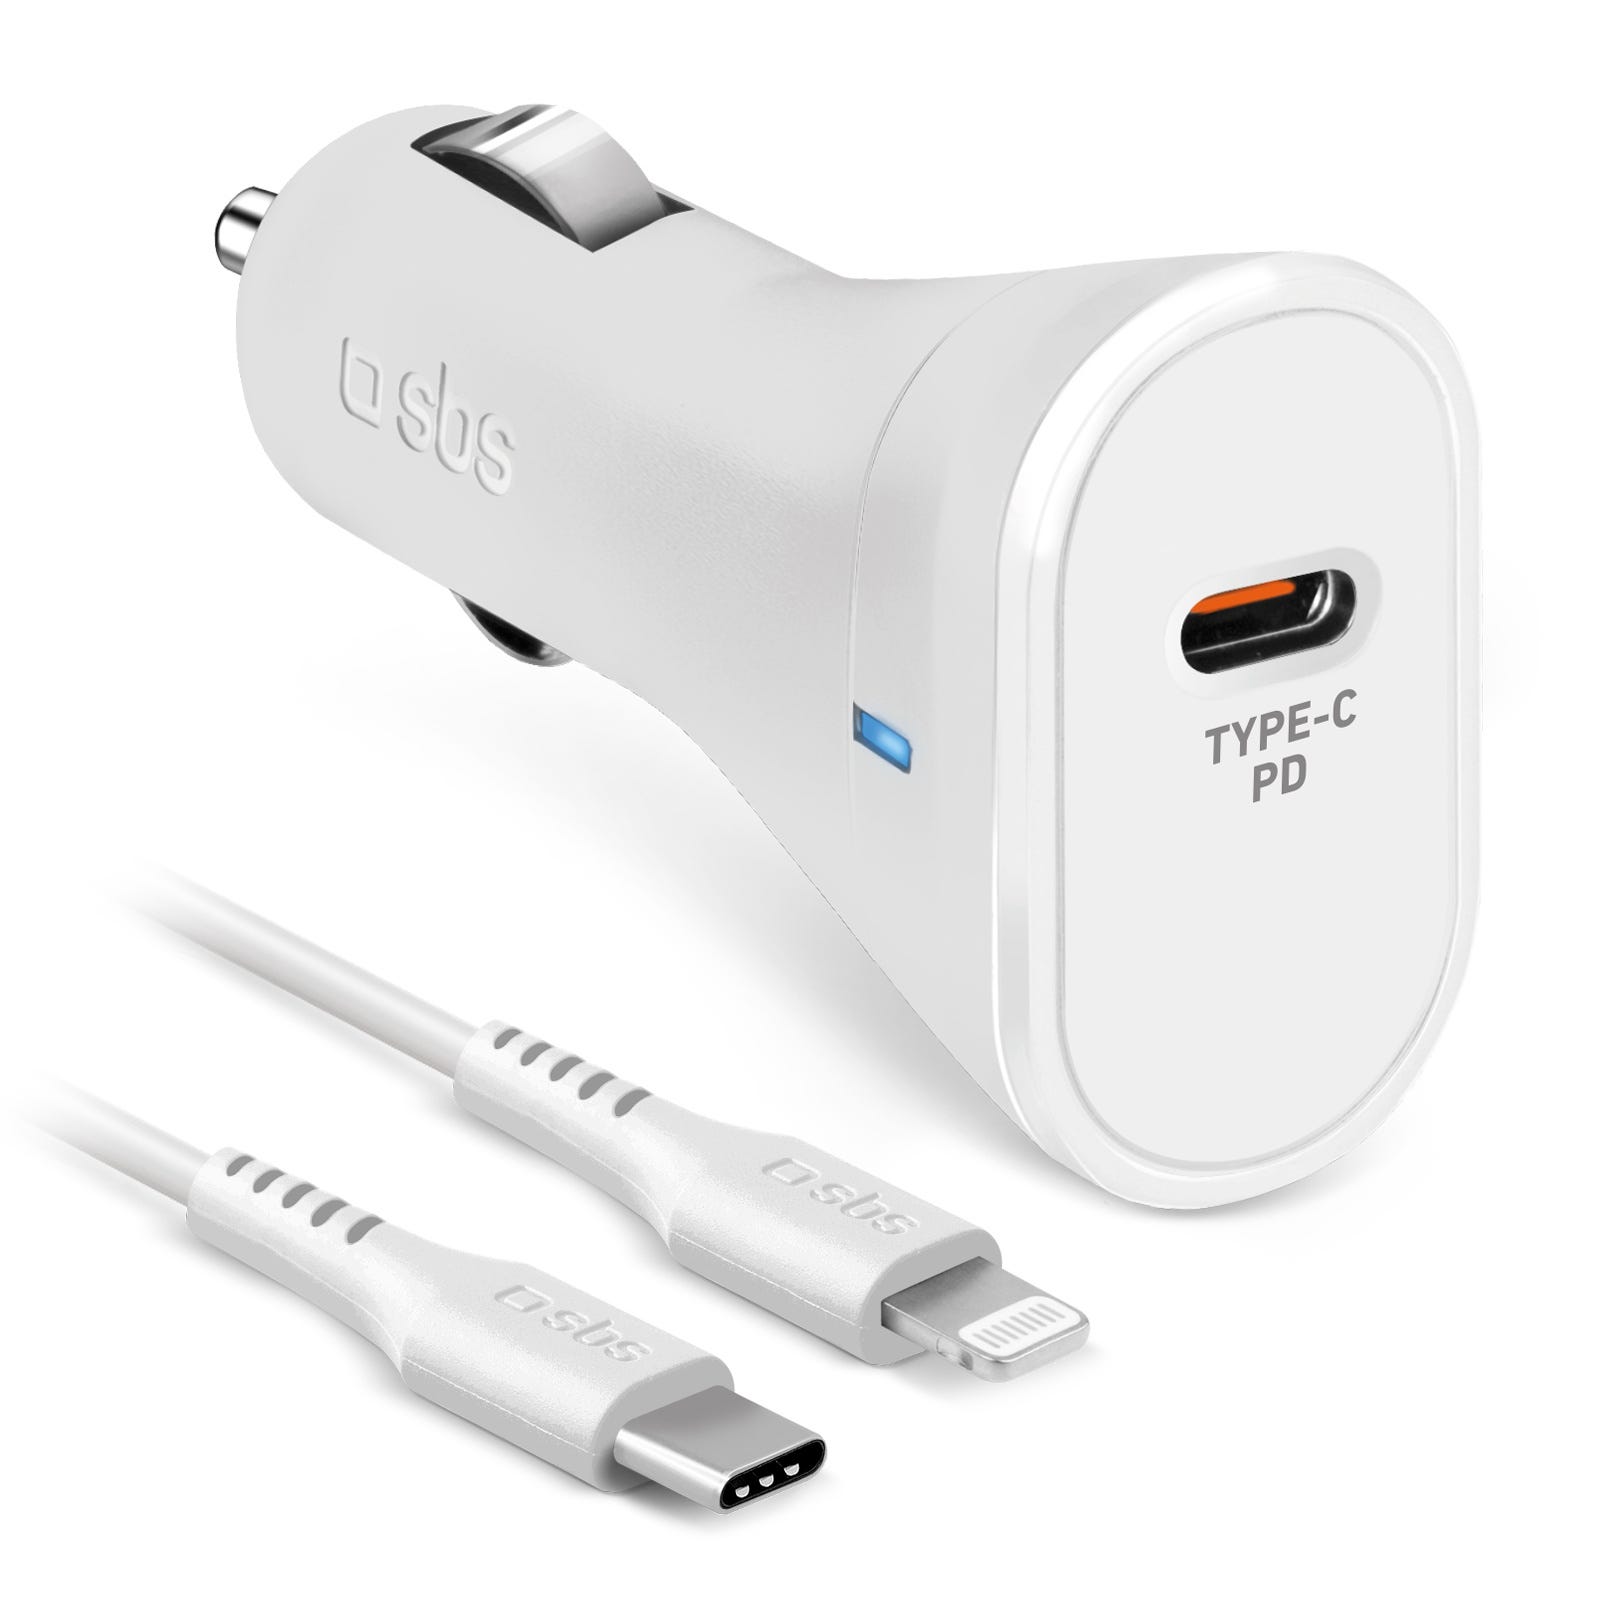 2-Pack pour iPhone / iPad / iPod AAA + Chargeur allume-cigare USB